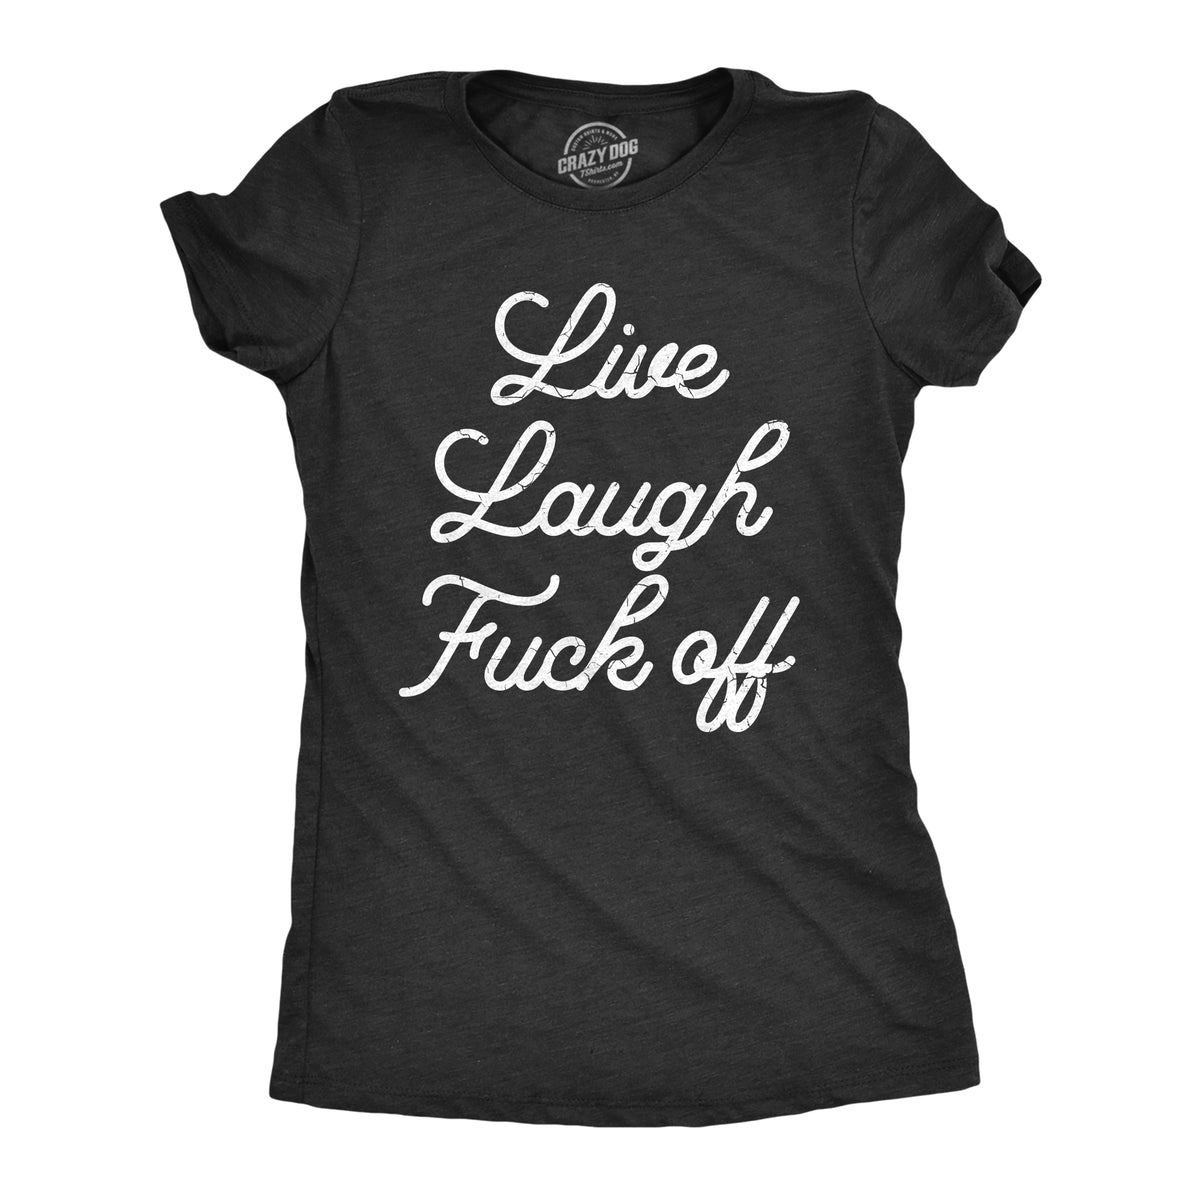 Funny Heather Black - FUCKOFF Live Laugh Fuck Off Womens T Shirt Nerdy sarcastic Tee